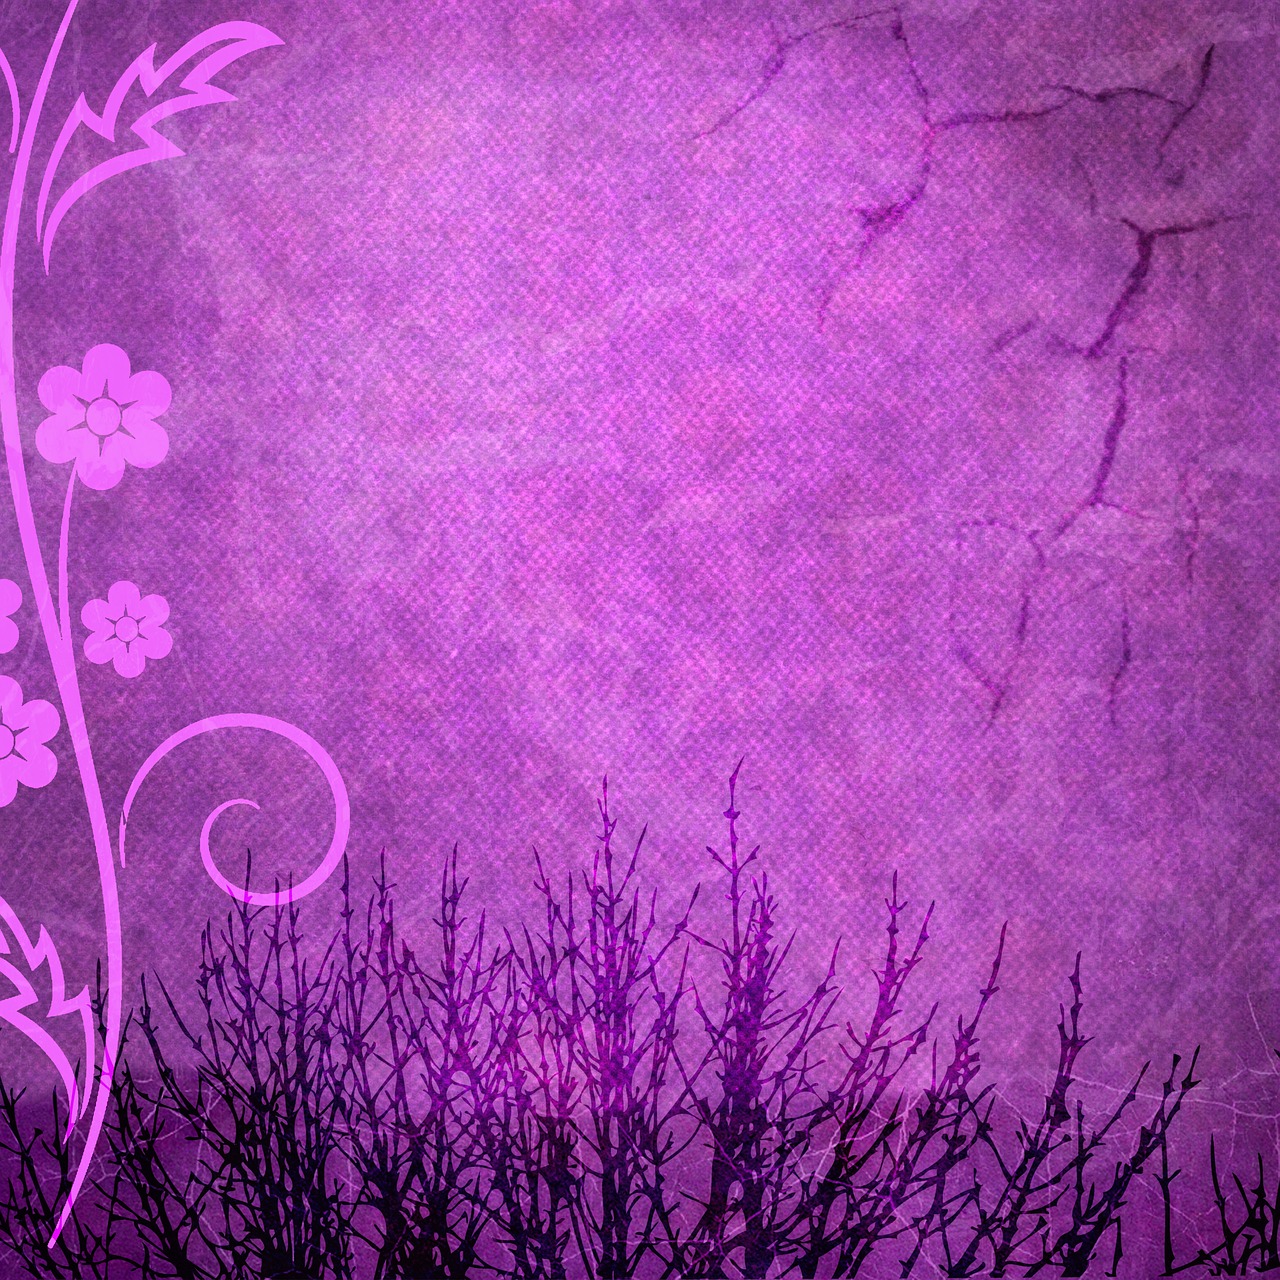 background scrapbooking paper free photo